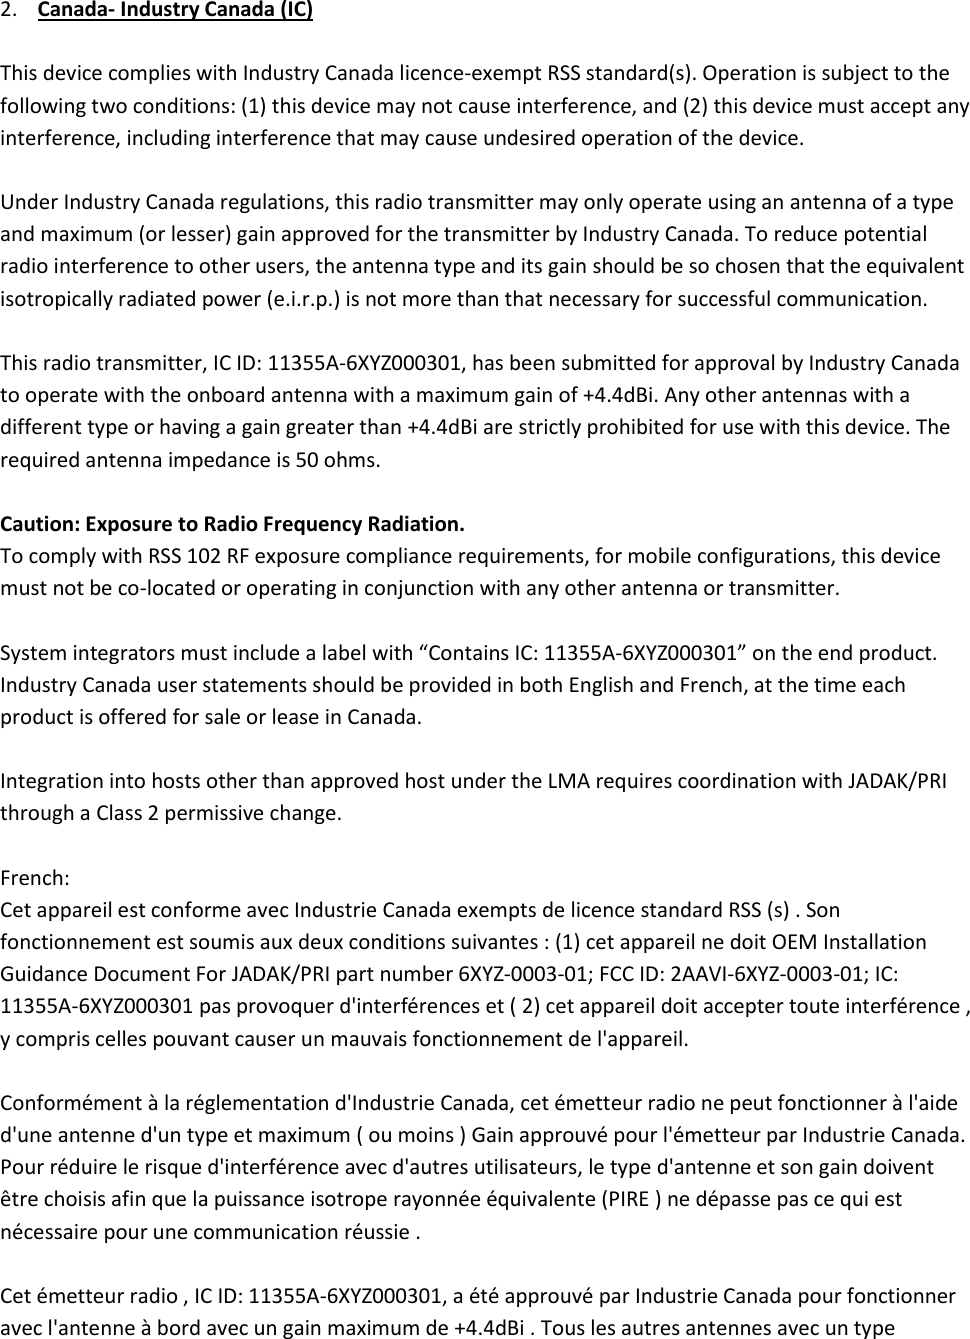 2. Canada- Industry Canada (IC)  This device complies with Industry Canada licence-exempt RSS standard(s). Operation is subject to the following two conditions: (1) this device may not cause interference, and (2) this device must accept any interference, including interference that may cause undesired operation of the device.   Under Industry Canada regulations, this radio transmitter may only operate using an antenna of a type and maximum (or lesser) gain approved for the transmitter by Industry Canada. To reduce potential radio interference to other users, the antenna type and its gain should be so chosen that the equivalent isotropically radiated power (e.i.r.p.) is not more than that necessary for successful communication.   This radio transmitter, IC ID: 11355A-6XYZ000301, has been submitted for approval by Industry Canada to operate with the onboard antenna with a maximum gain of +4.4dBi. Any other antennas with a different type or having a gain greater than +4.4dBi are strictly prohibited for use with this device. The required antenna impedance is 50 ohms.   Caution: Exposure to Radio Frequency Radiation.  To comply with RSS 102 RF exposure compliance requirements, for mobile configurations, this device must not be co-located or operating in conjunction with any other antenna or transmitter.   System integrators must include a label with “Contains IC: 11355A-6XYZ000301” on the end product. Industry Canada user statements should be provided in both English and French, at the time each product is offered for sale or lease in Canada.   Integration into hosts other than approved host under the LMA requires coordination with JADAK/PRI through a Class 2 permissive change.   French:  Cet appareil est conforme avec Industrie Canada exempts de licence standard RSS (s) . Son fonctionnement est soumis aux deux conditions suivantes : (1) cet appareil ne doit OEM Installation Guidance Document For JADAK/PRI part number 6XYZ-0003-01; FCC ID: 2AAVI-6XYZ-0003-01; IC: 11355A-6XYZ000301 pas provoquer d&apos;interférences et ( 2) cet appareil doit accepter toute interférence , y compris celles pouvant causer un mauvais fonctionnement de l&apos;appareil.   Conformément à la réglementation d&apos;Industrie Canada, cet émetteur radio ne peut fonctionner à l&apos;aide d&apos;une antenne d&apos;un type et maximum ( ou moins ) Gain approuvé pour l&apos;émetteur par Industrie Canada. Pour réduire le risque d&apos;interférence avec d&apos;autres utilisateurs, le type d&apos;antenne et son gain doivent être choisis afin que la puissance isotrope rayonnée équivalente (PIRE ) ne dépasse pas ce qui est nécessaire pour une communication réussie .   Cet émetteur radio , IC ID: 11355A-6XYZ000301, a été approuvé par Industrie Canada pour fonctionner avec l&apos;antenne à bord avec un gain maximum de +4.4dBi . Tous les autres antennes avec un type 